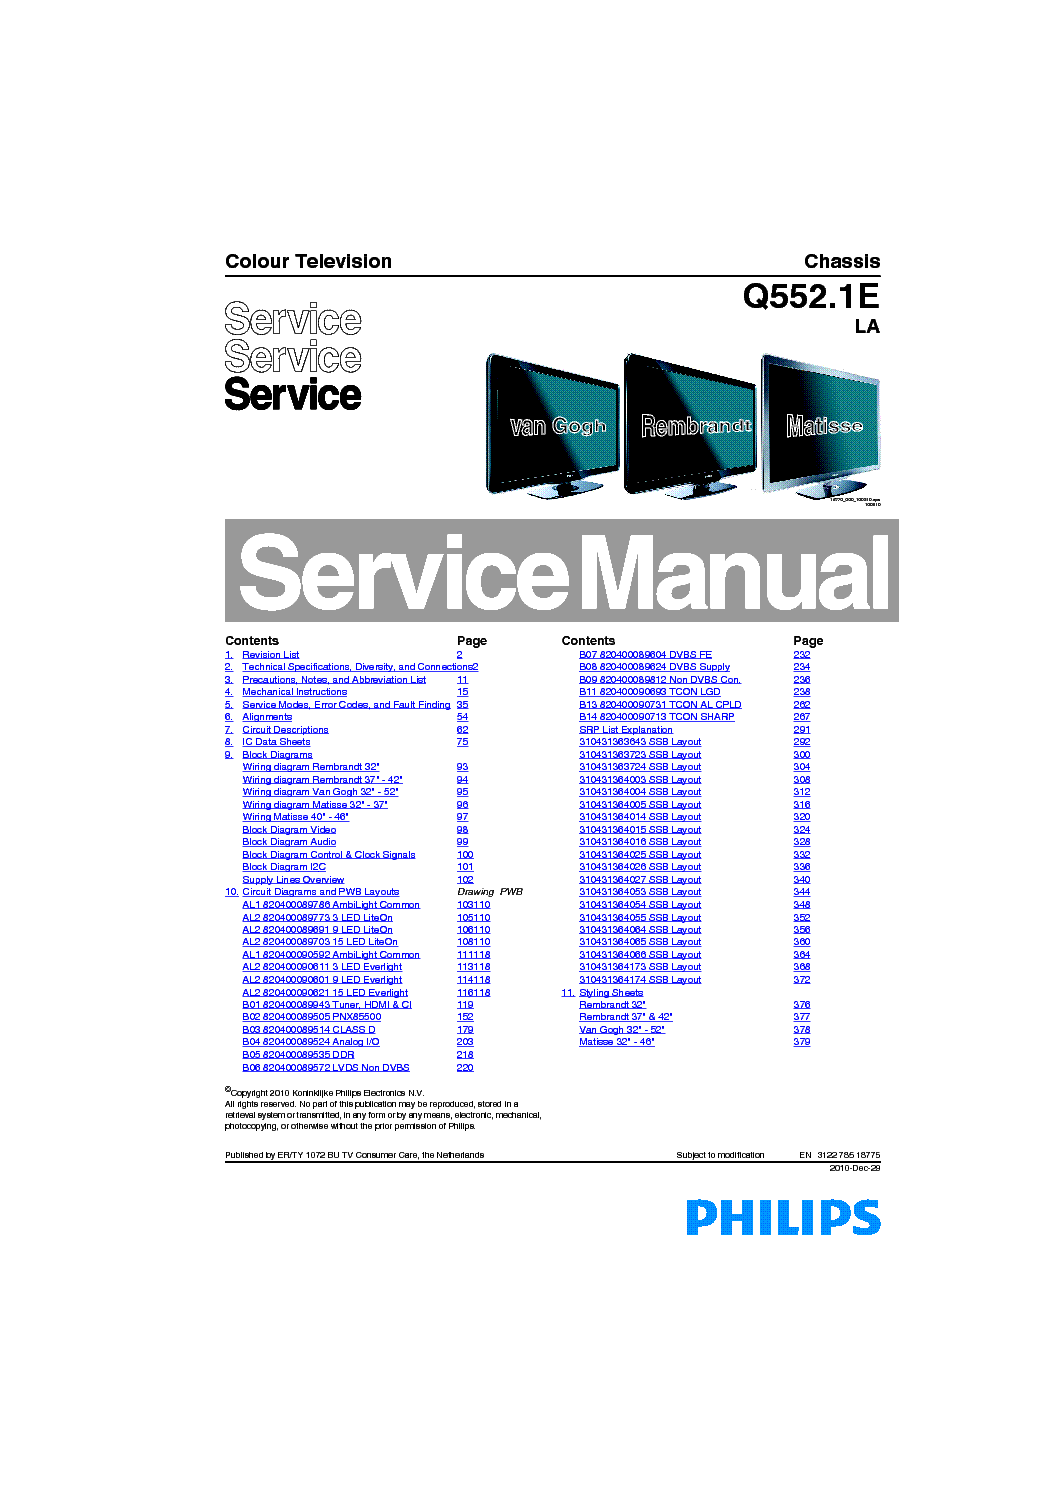 PHILIPS Q552.1ELA 312278518775 service manual (1st page)